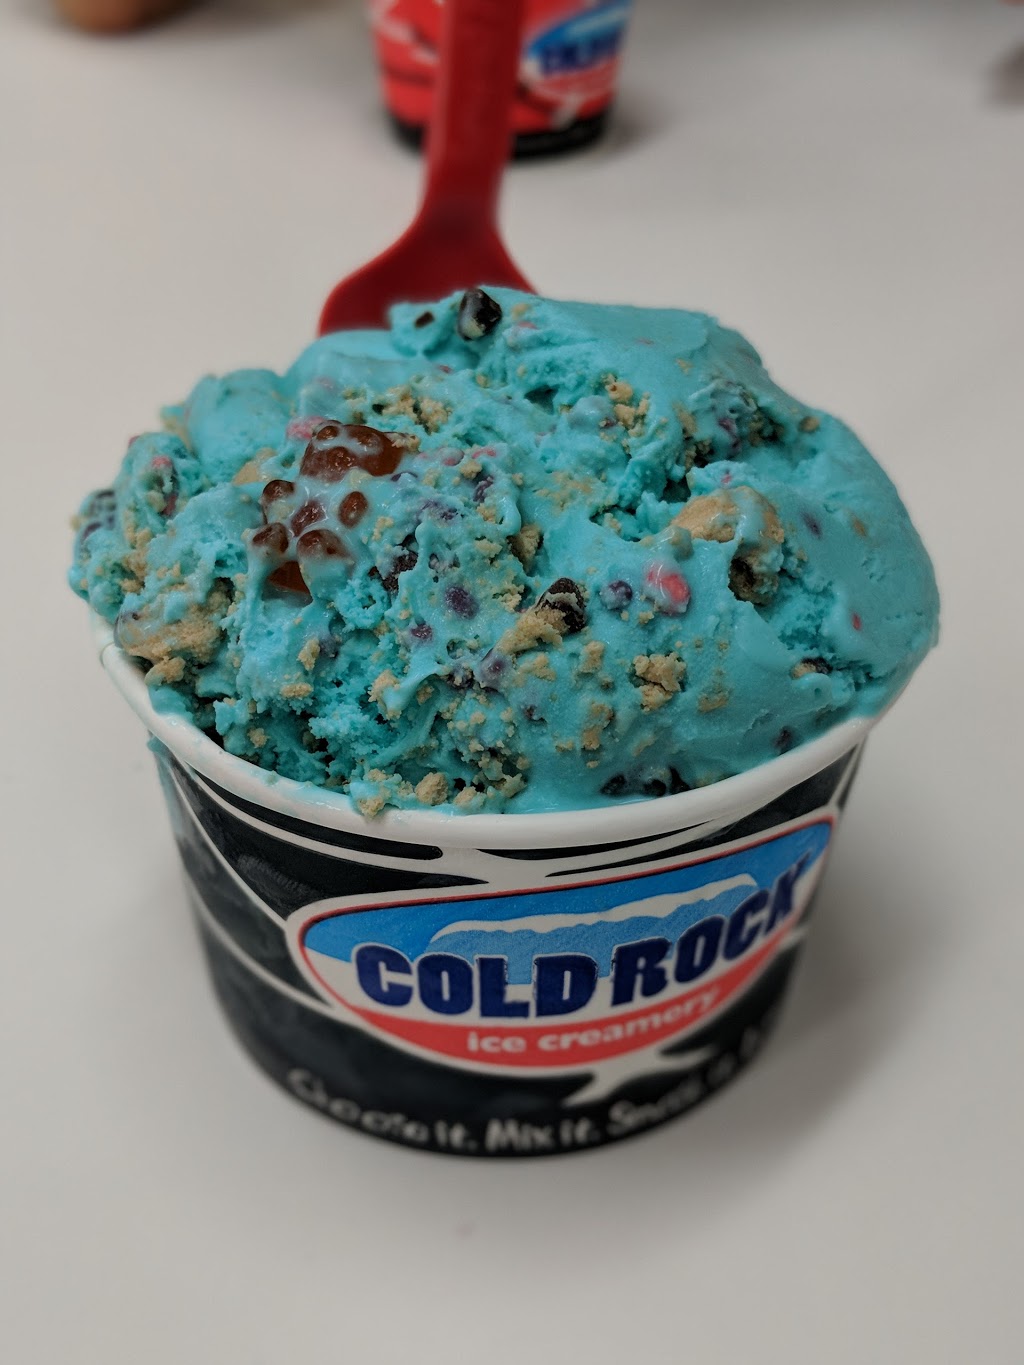 Cold Rock ice creamery | 794 A-796 Ruthven St &, Alderley St, South Toowoomba QLD 4350, Australia | Phone: (07) 4613 4666